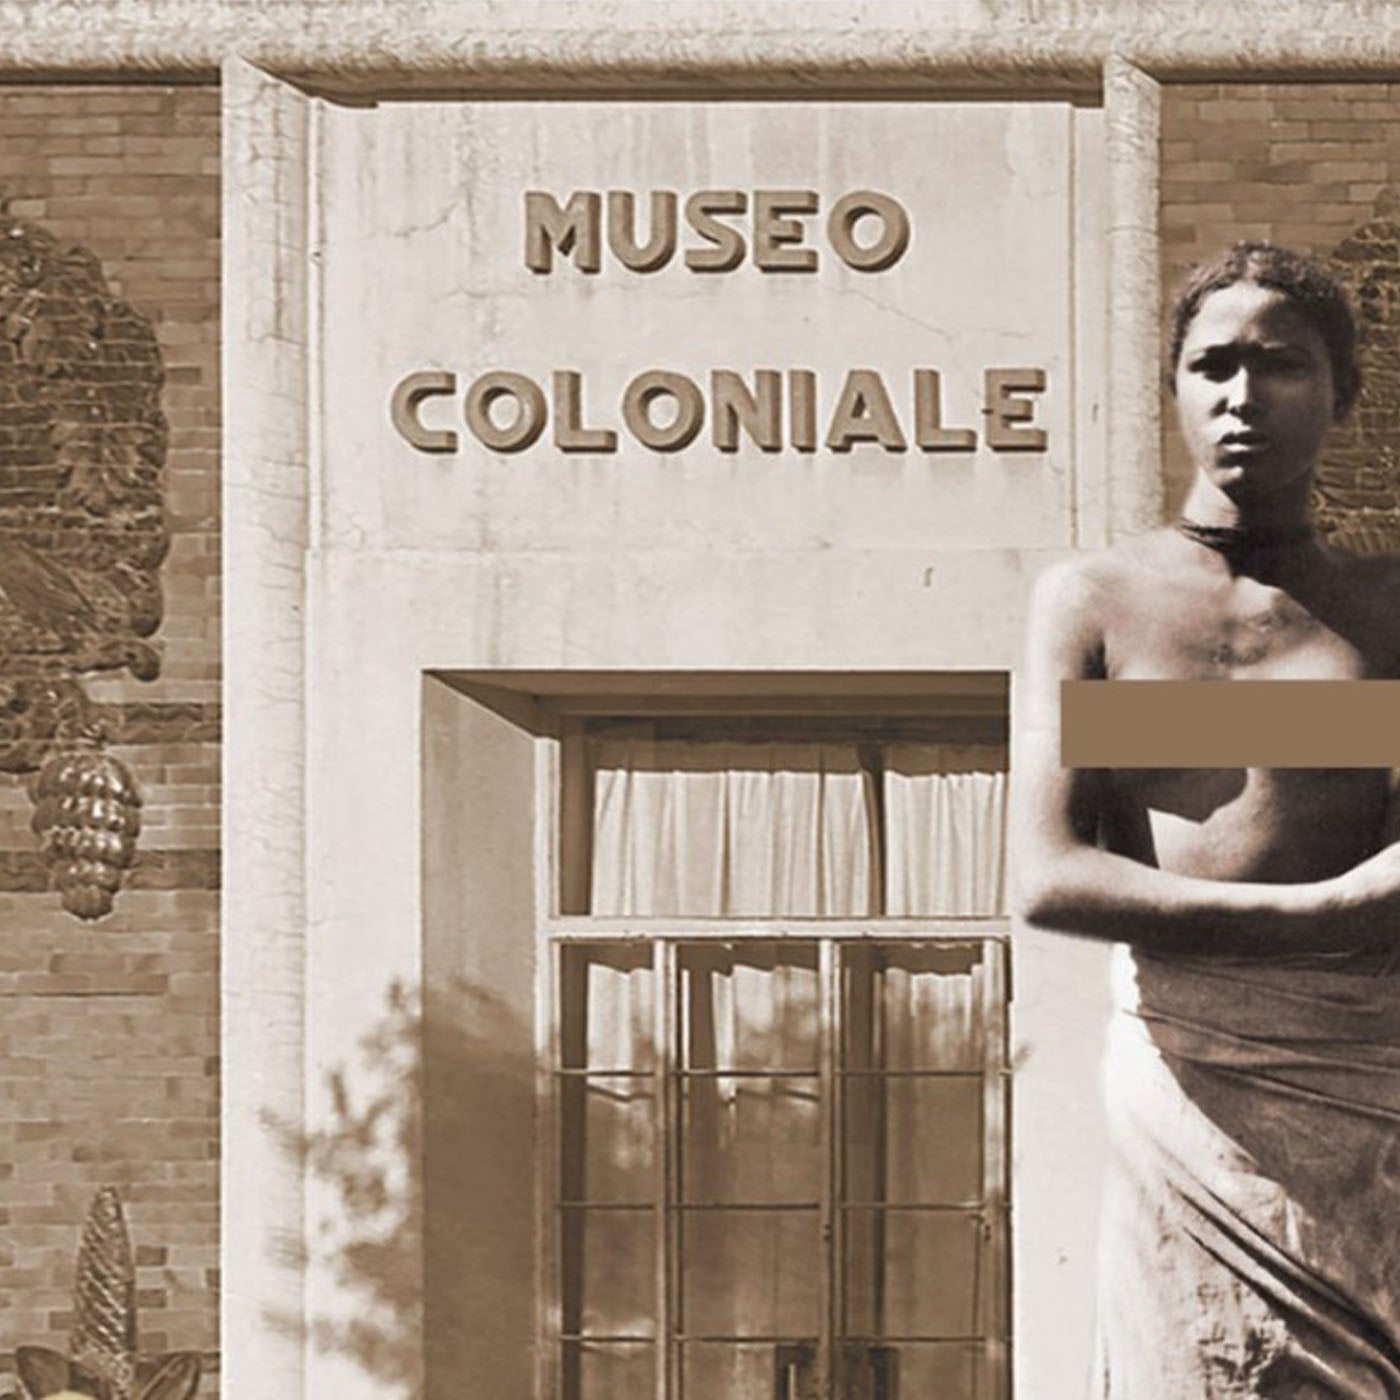 Season 2, Episode 1: Revival and Reckoning: A Colonial Museum in Postcolonial Italy